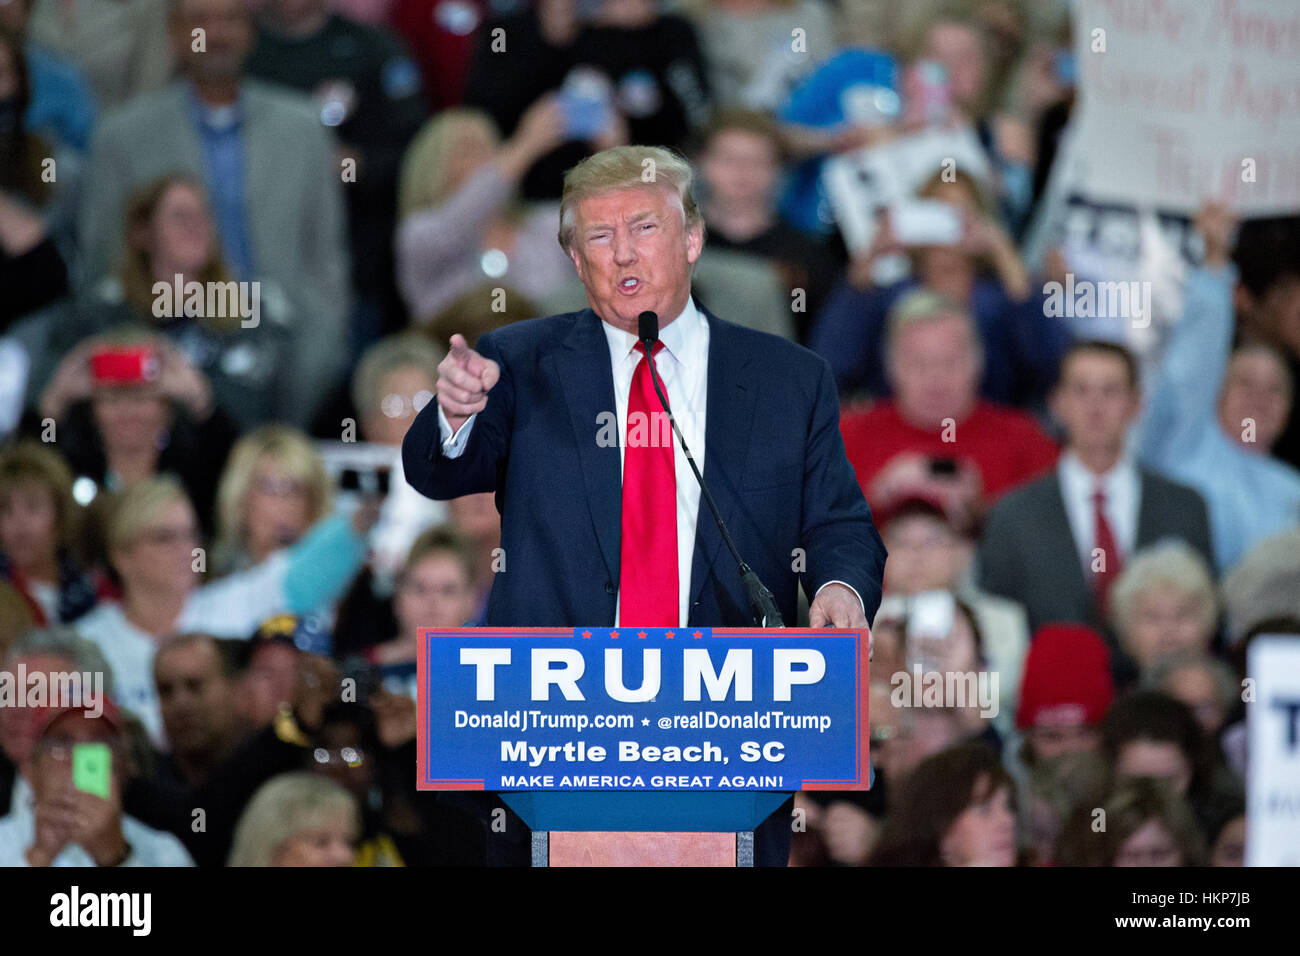 Republican presidential candidate billionaire Donald Trump points to the media riser during an attack on the reporters at a campaign rally at the Myrtle Beach Convention Center November 24, 2015 in Myrtle Beach, South Carolina. Stock Photo